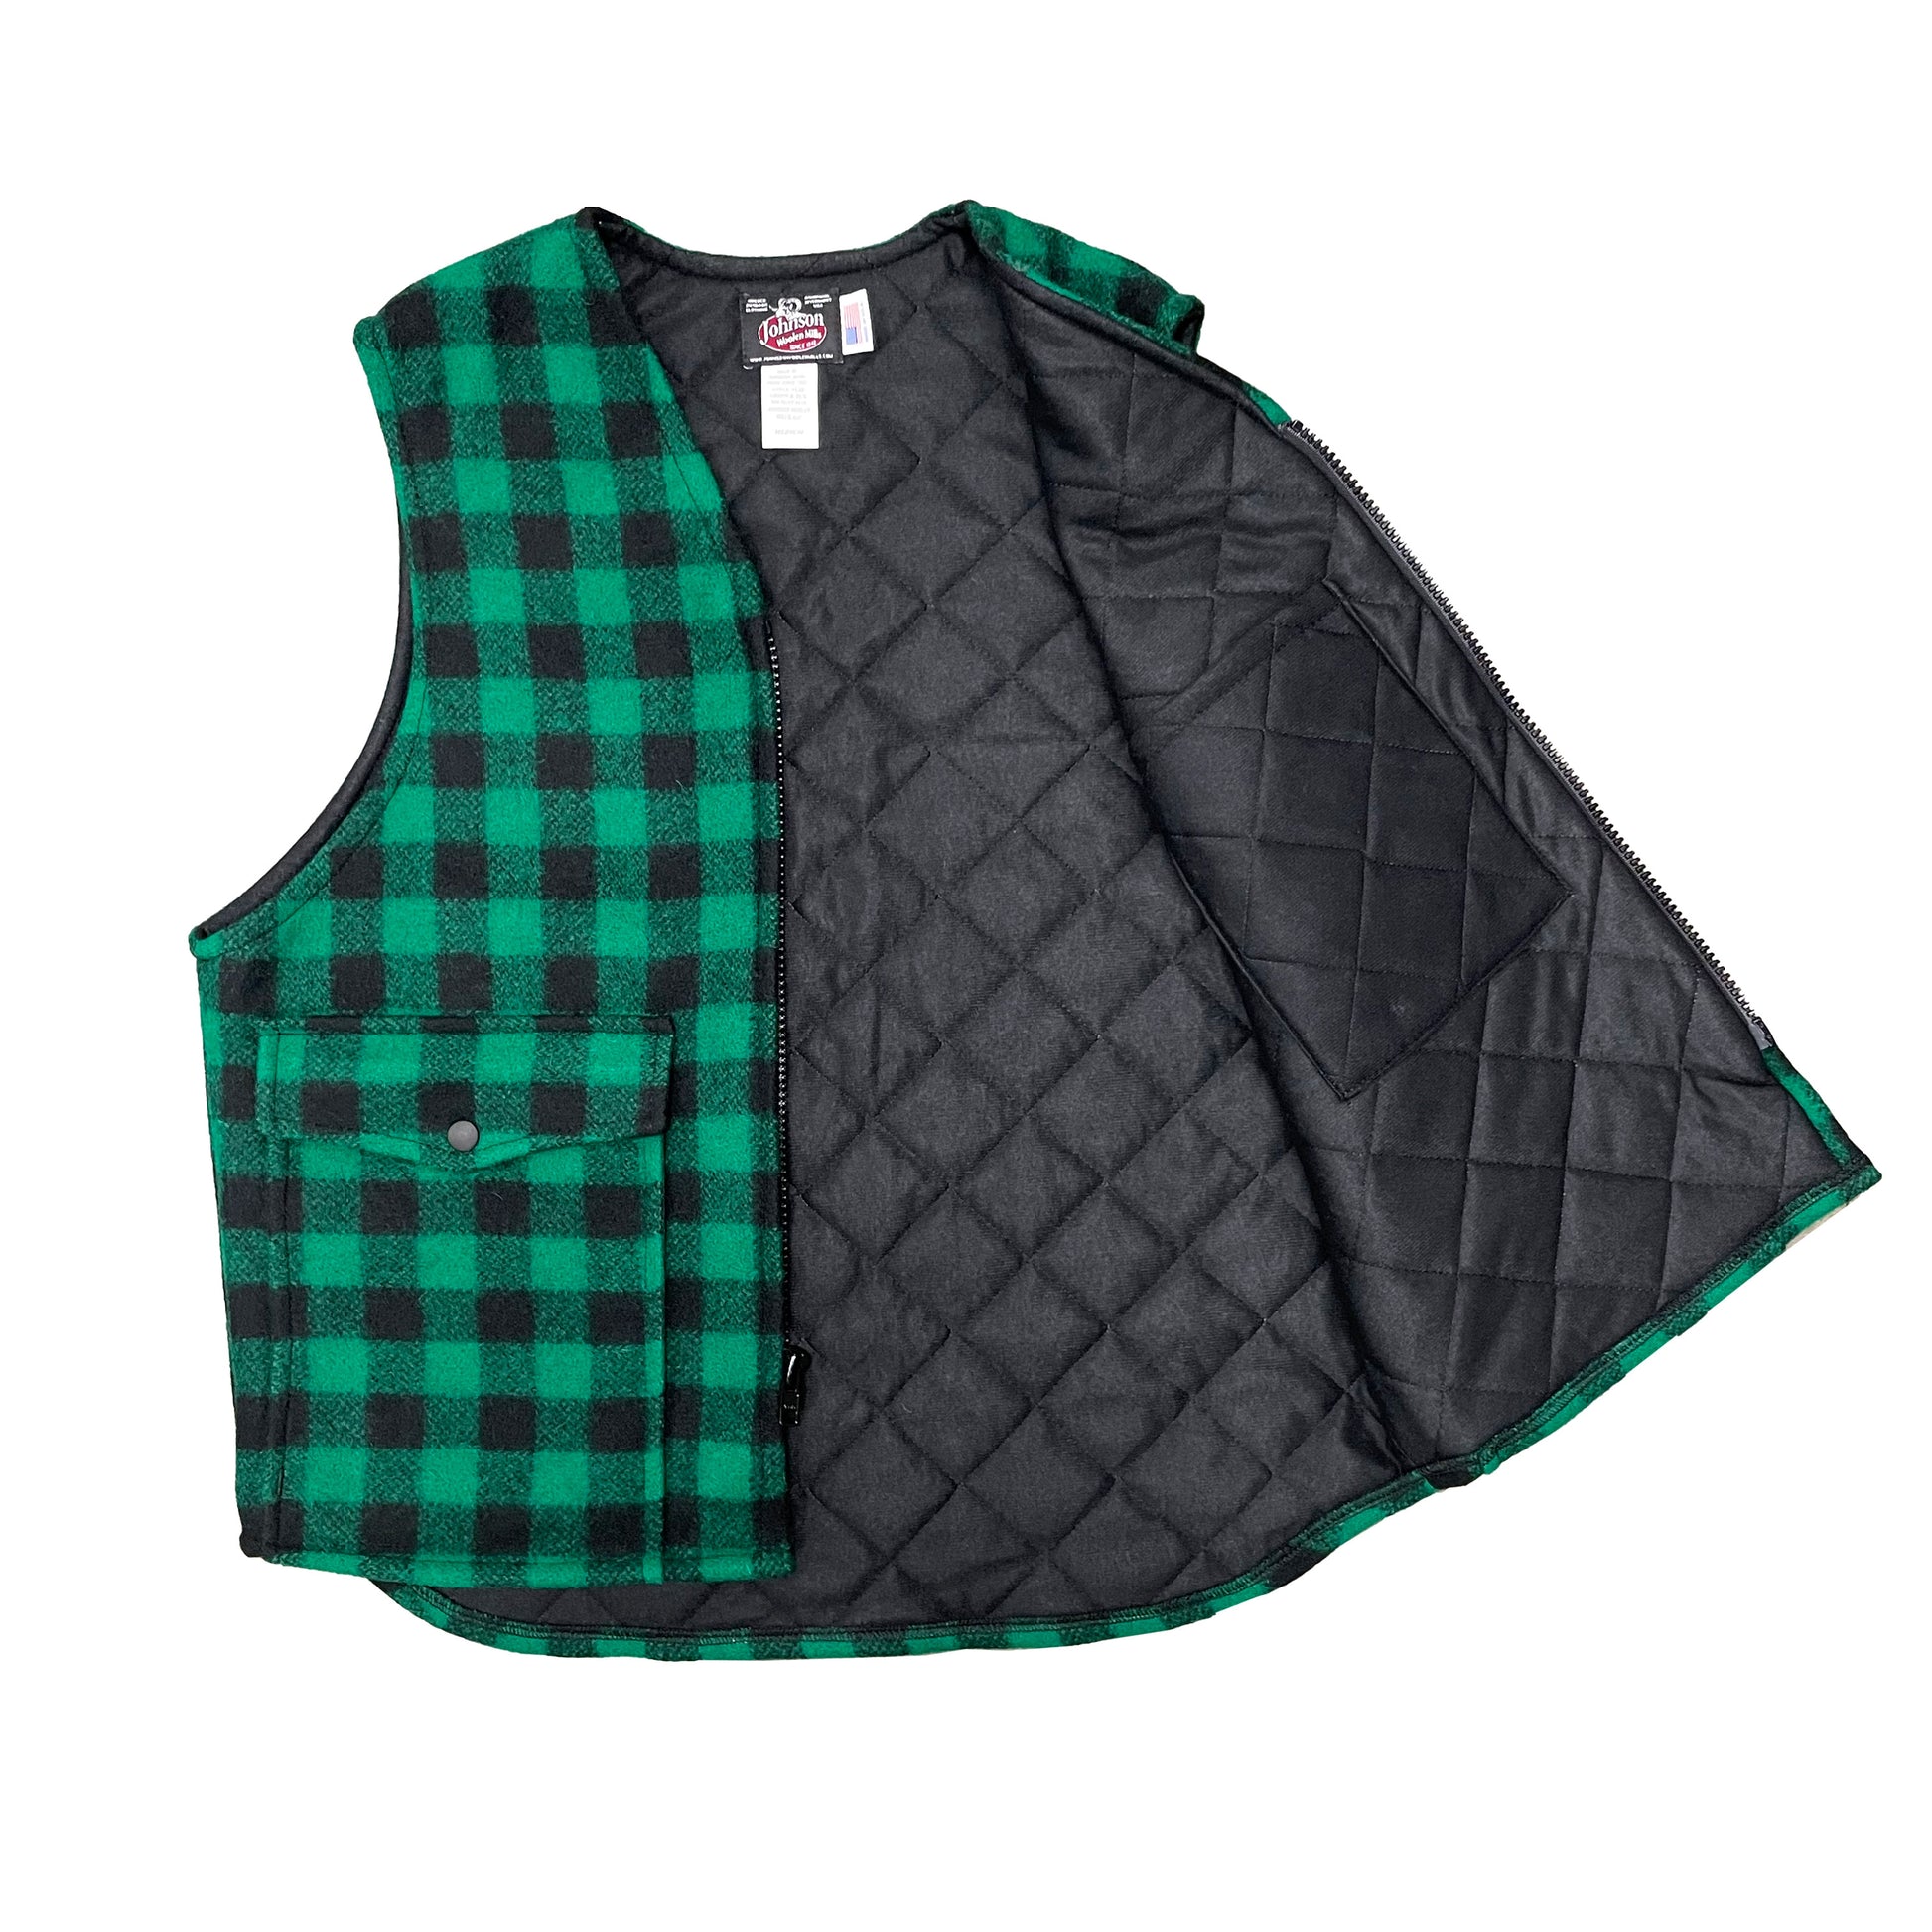 Vest with tricot lining, green & black buffalo check, zipper front, two large pockets and chest pocket, interior view